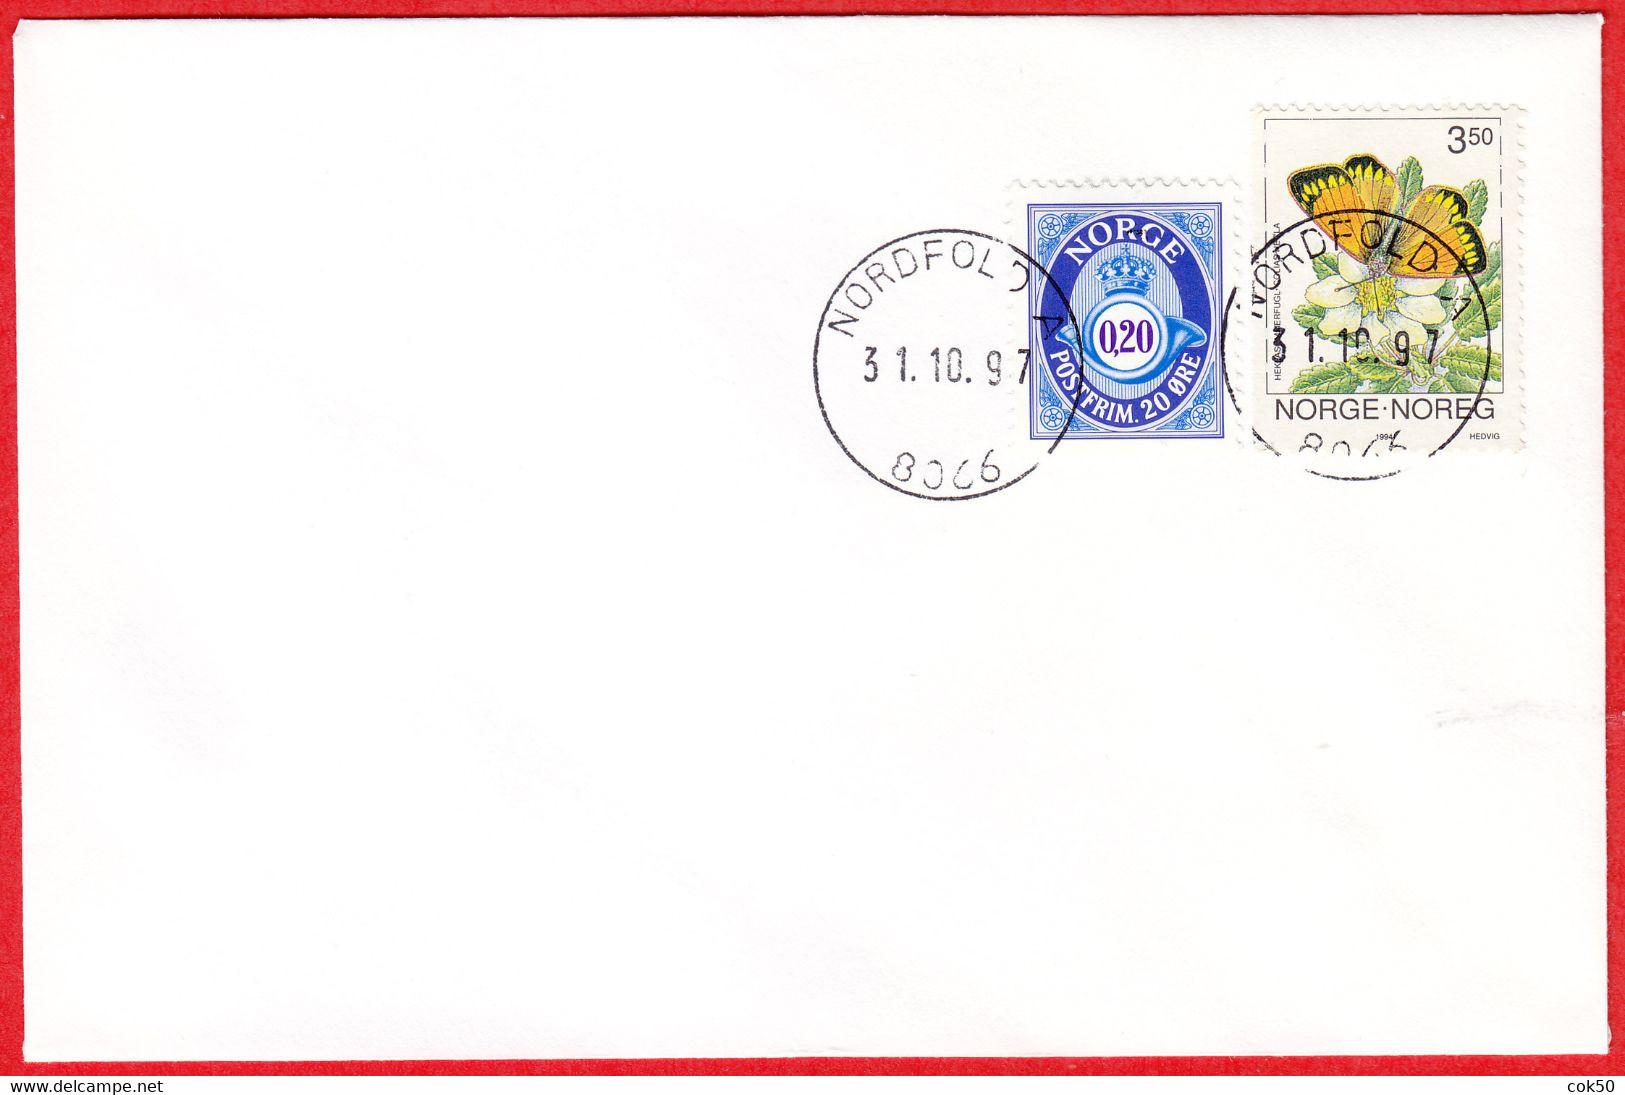 NORWAY -  8066 NORDFOLD A - 24 MmØ - (Nordland County) - Last Day/postoffice Closed On 1997.10.31 - Local Post Stamps